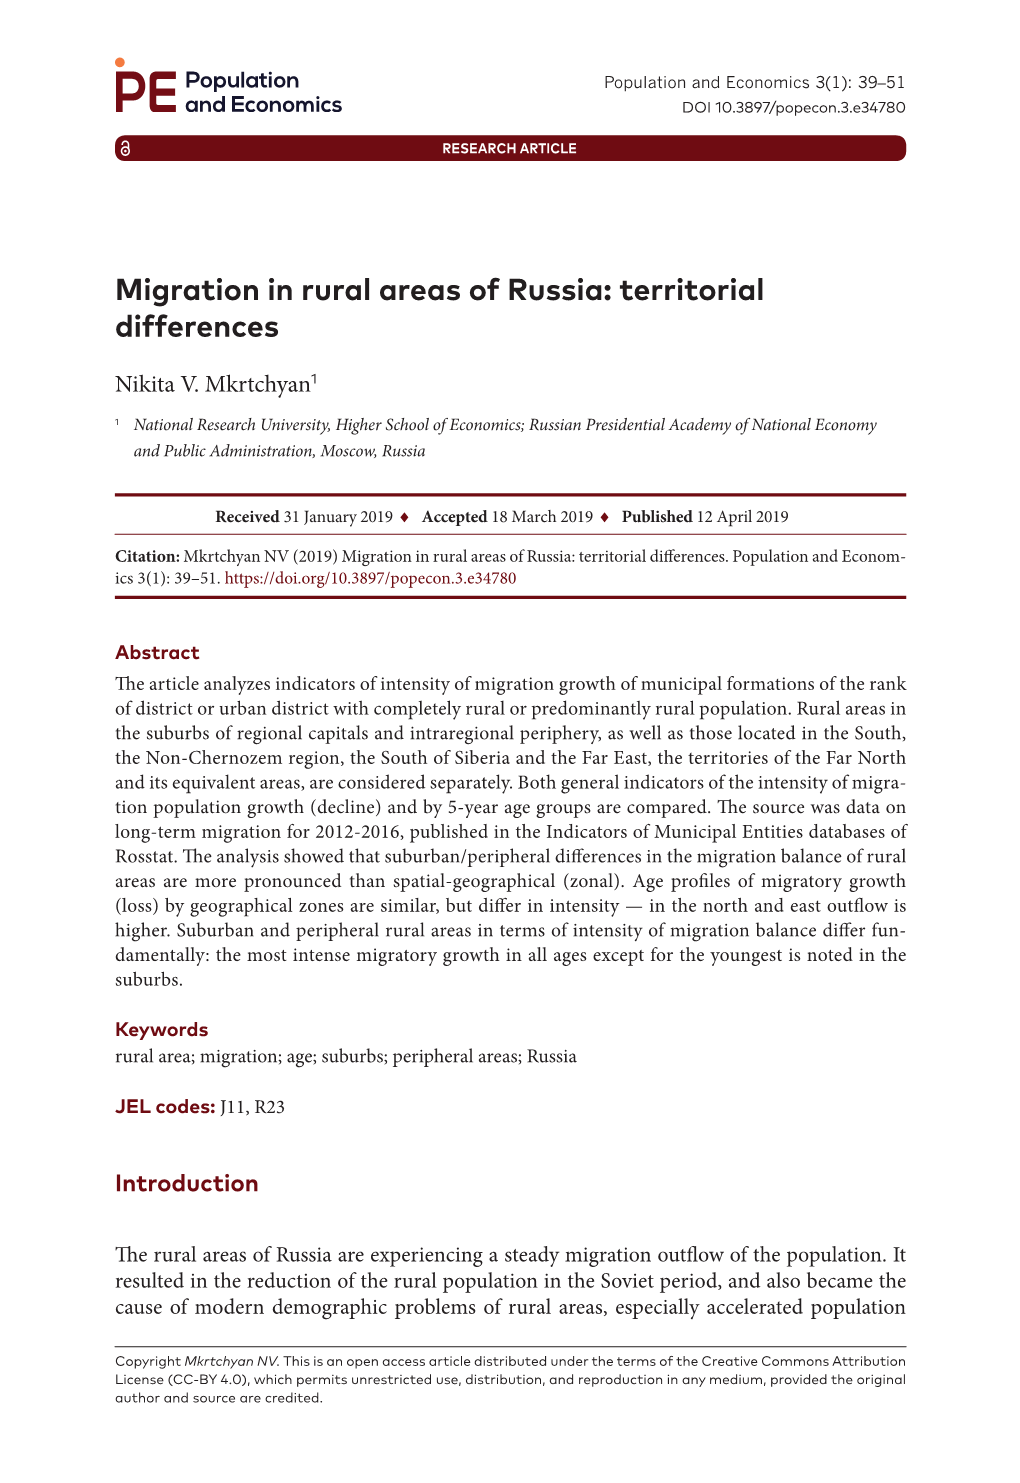 Migration in Rural Areas of Russia: Territorial Differences